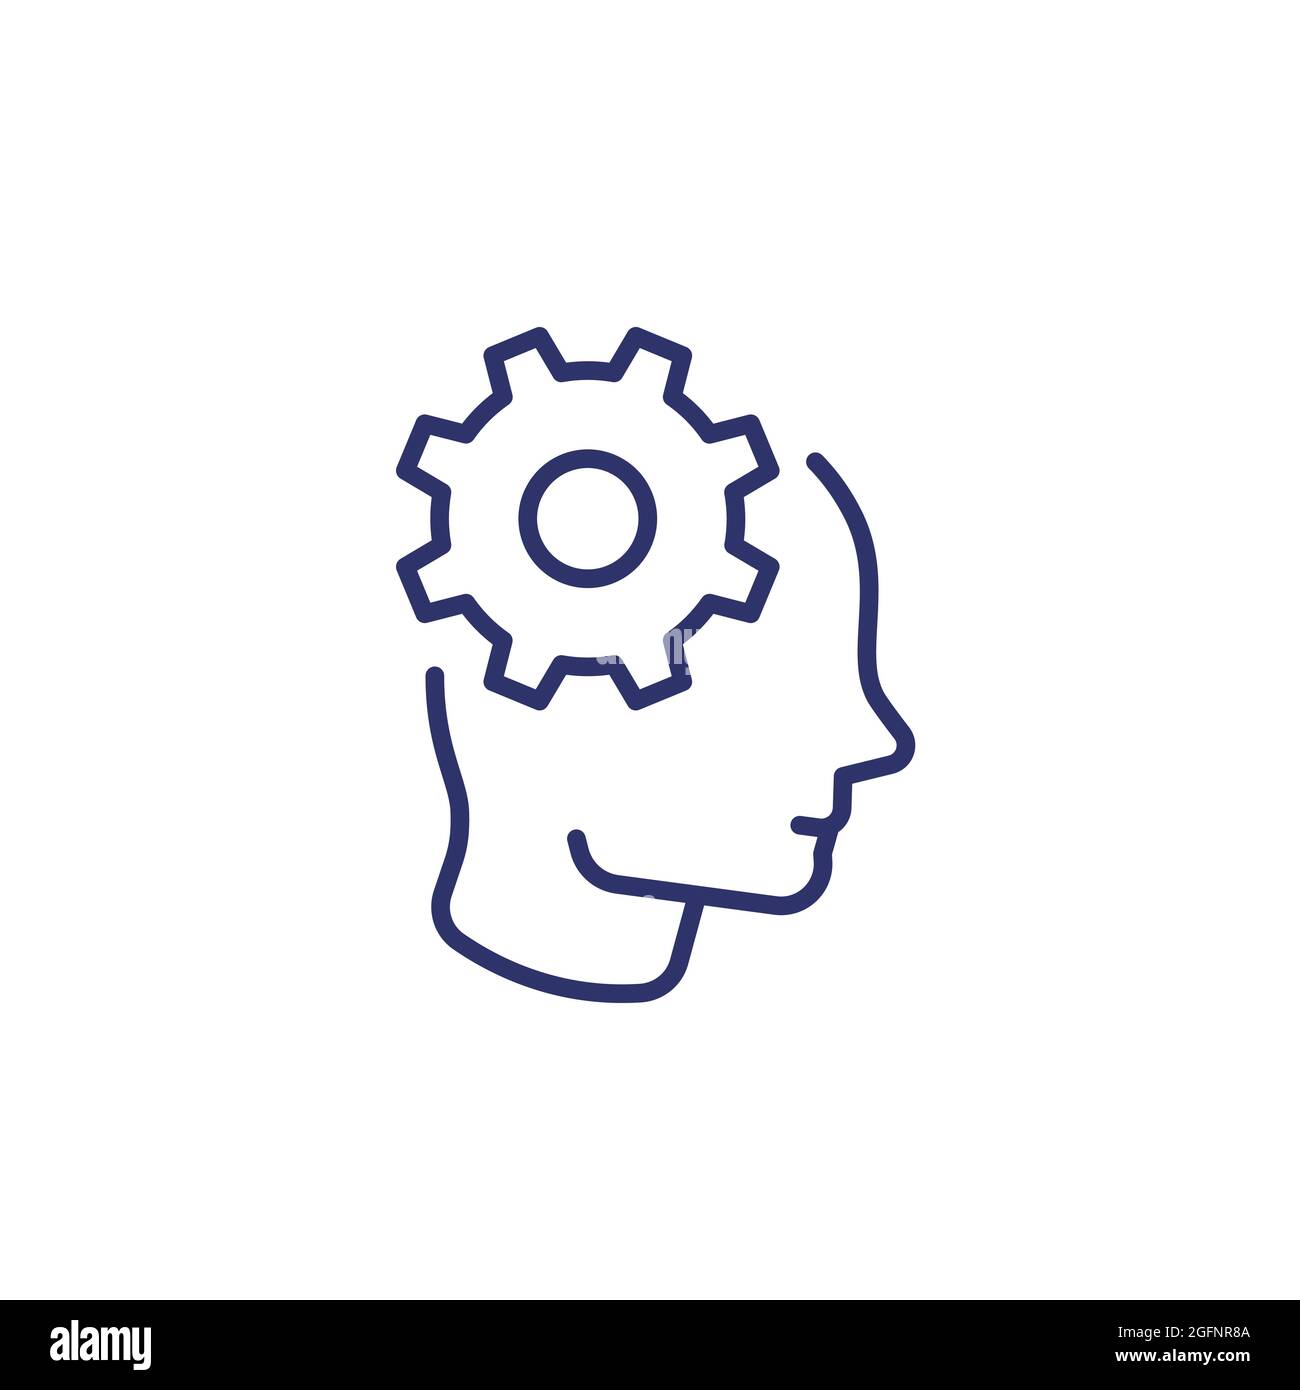 creativity, thinking line icon with head and gear Stock Vector